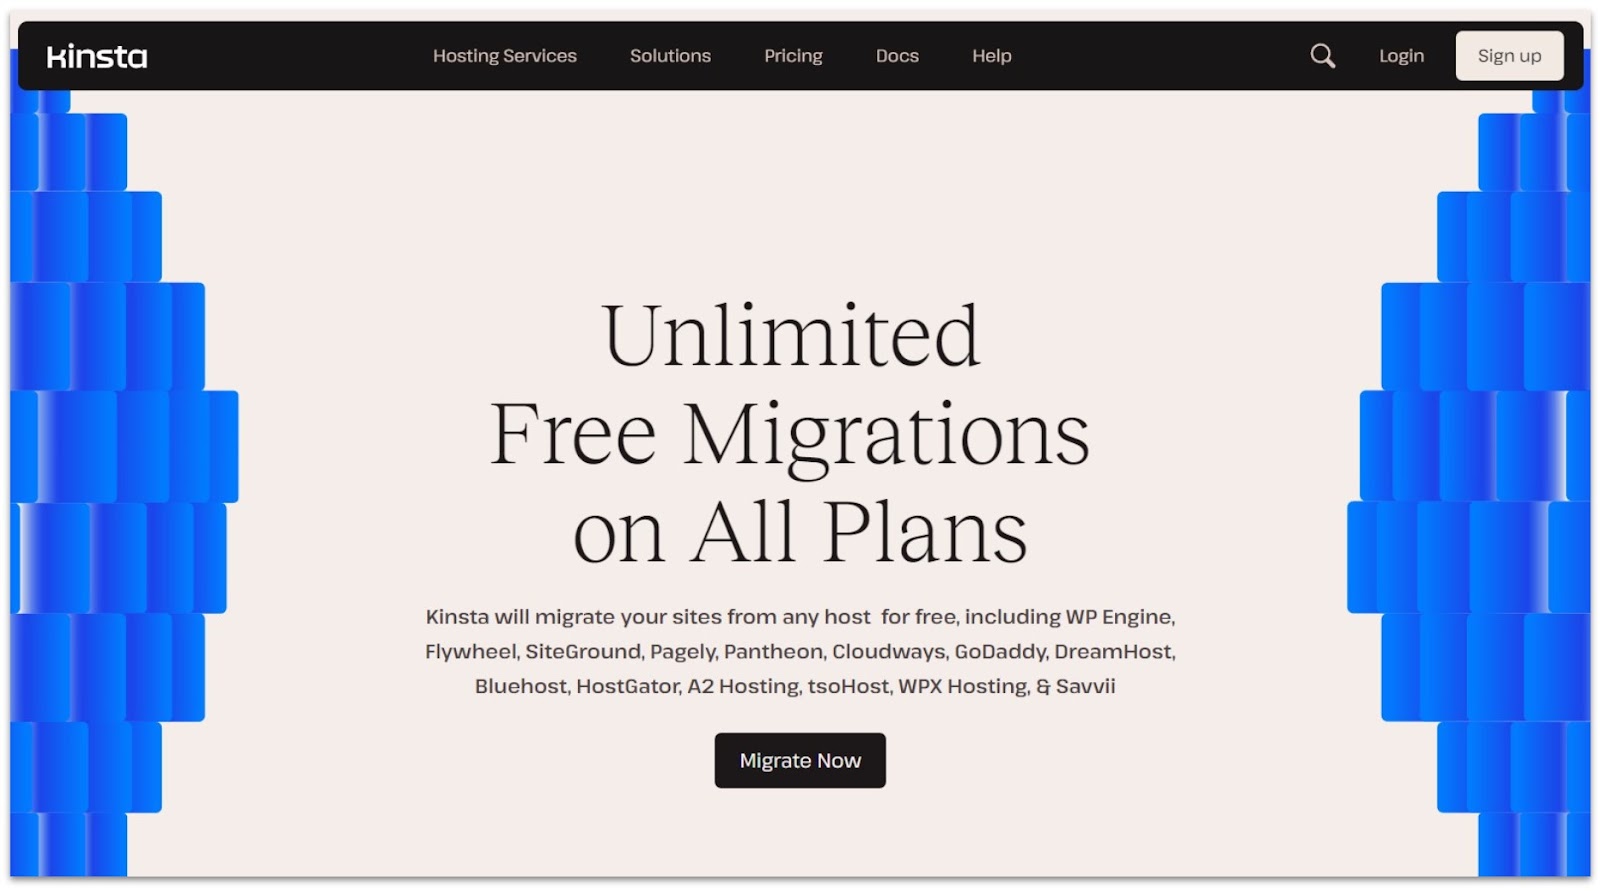 Kinsta unlimited free site migration services